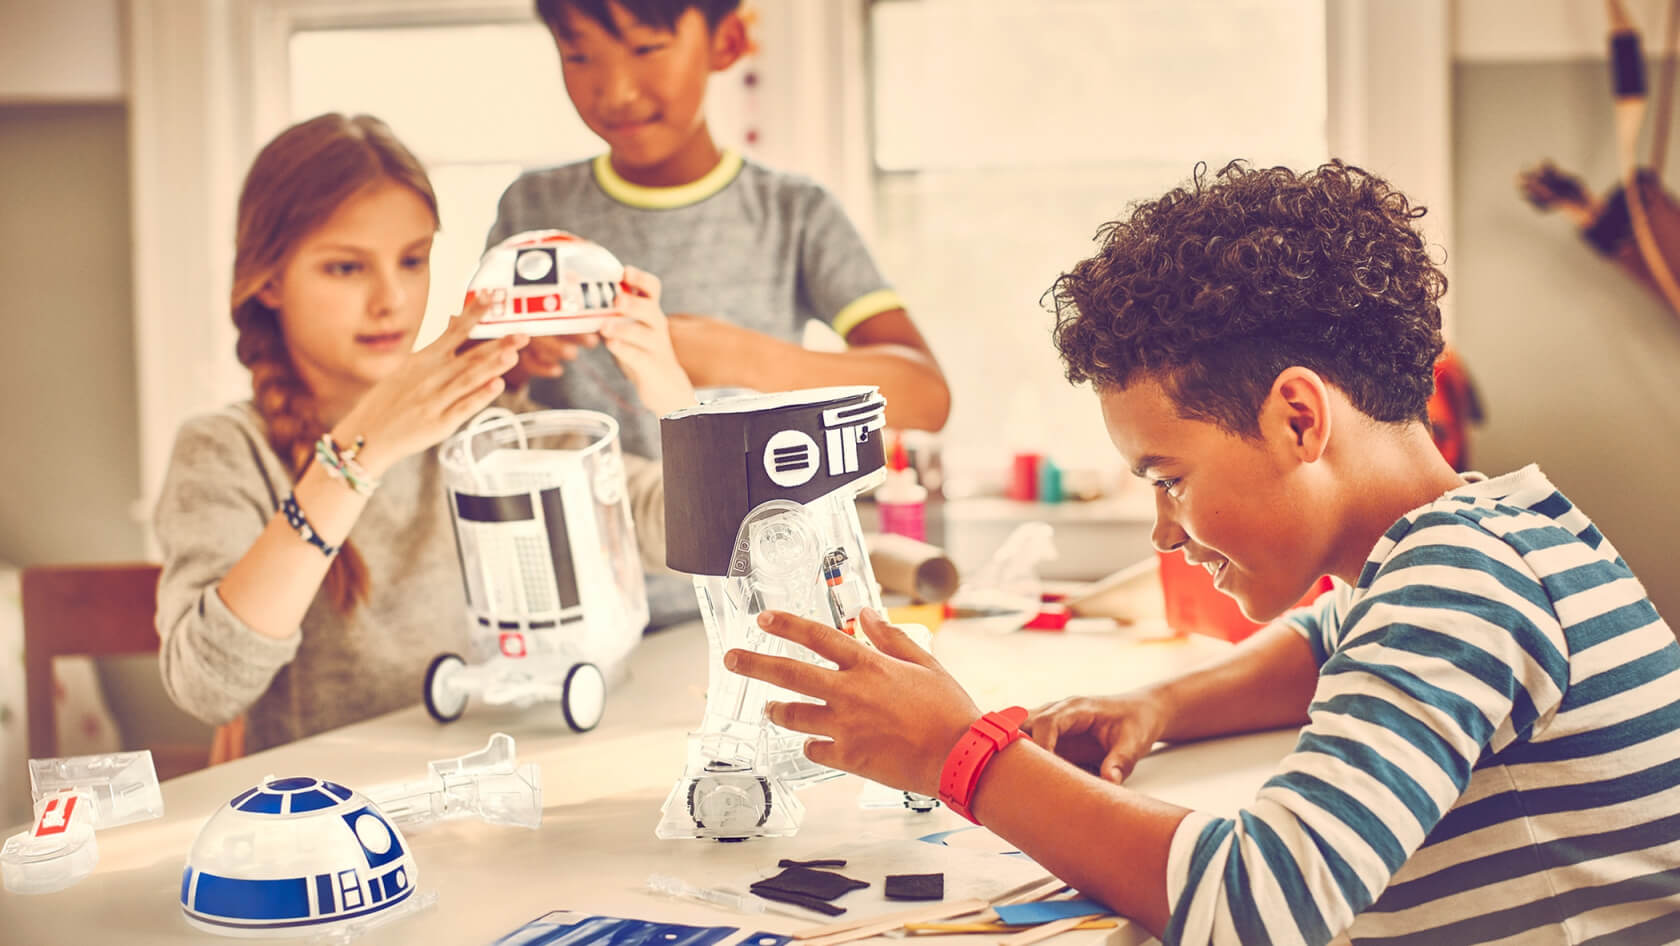 Kids can build a droid and learn about electronics with littleBits R2D2 kit